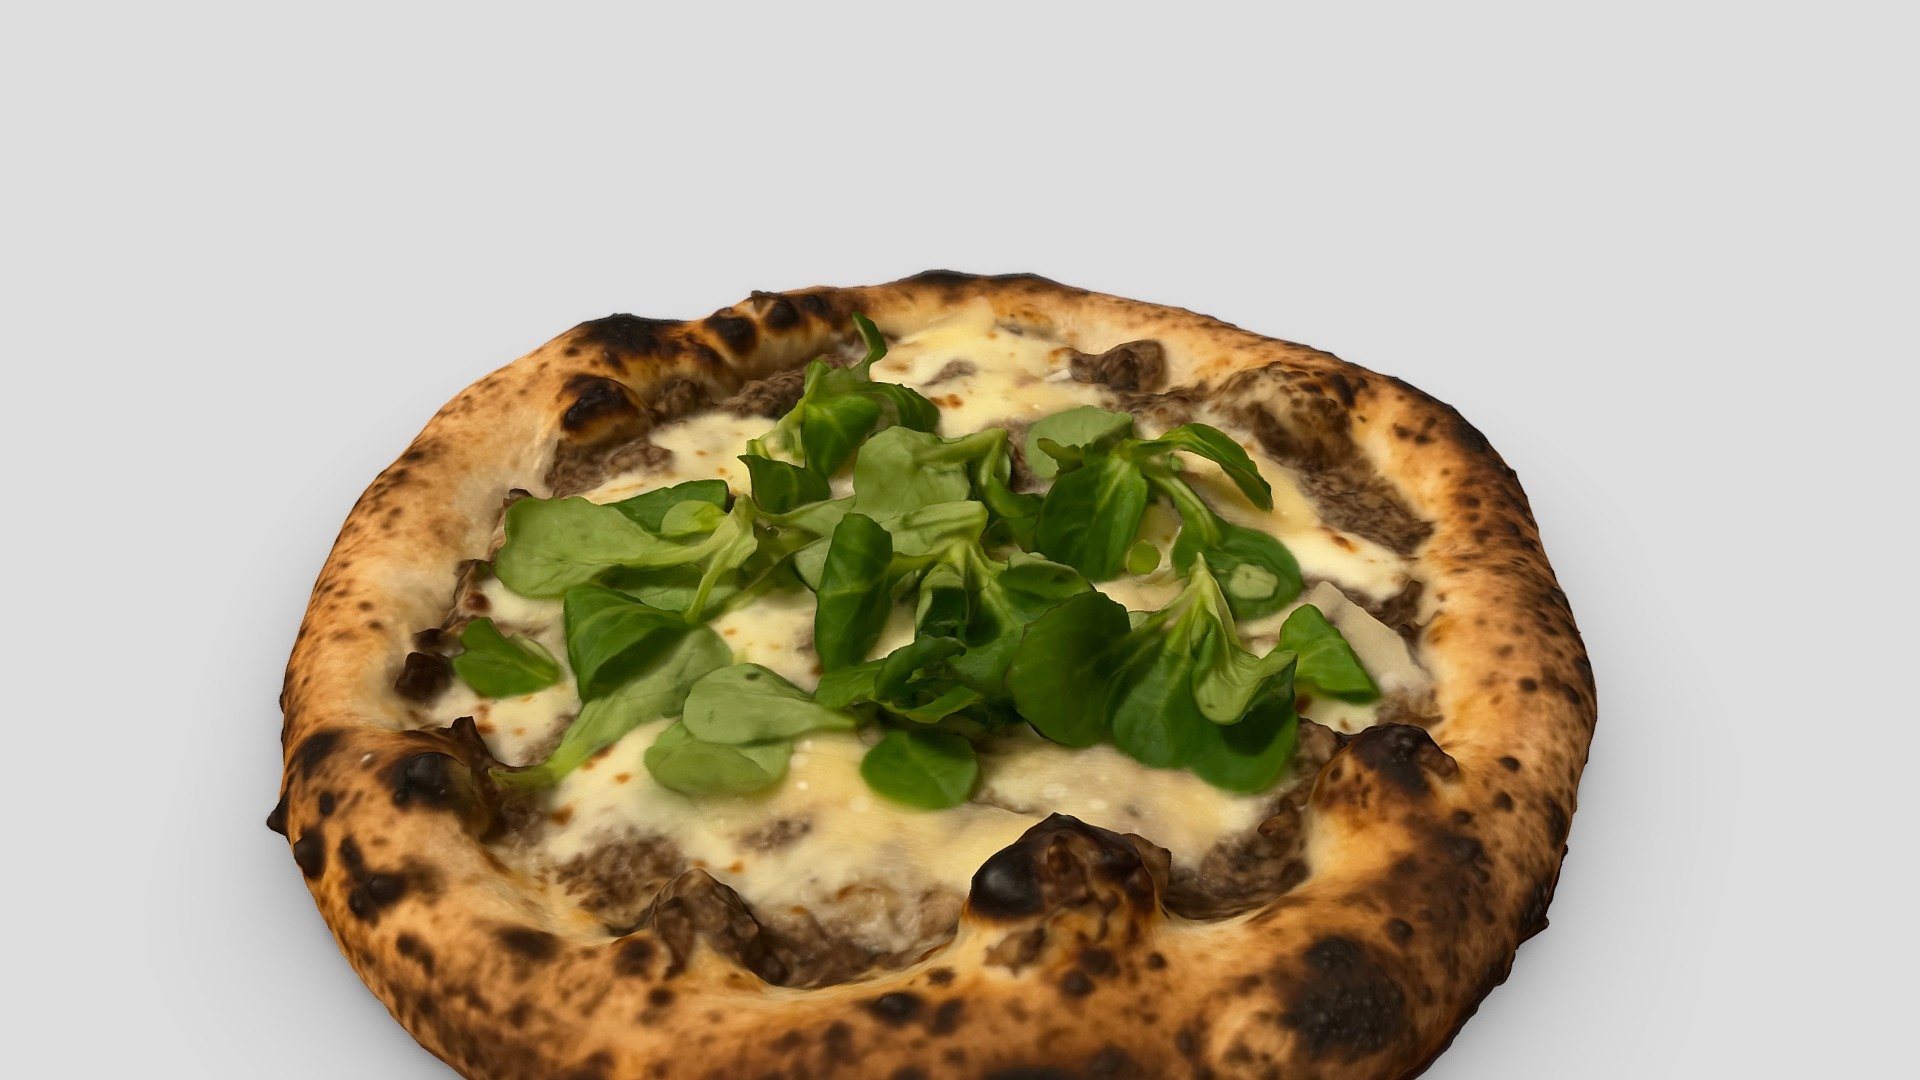 Homemade truffle pizza toped with lamb's lettuce

Cooked with the amazing branner pizza oven.

Scanned with RealityScan - Homemade truffle pizza - 3D model by alban 3d model